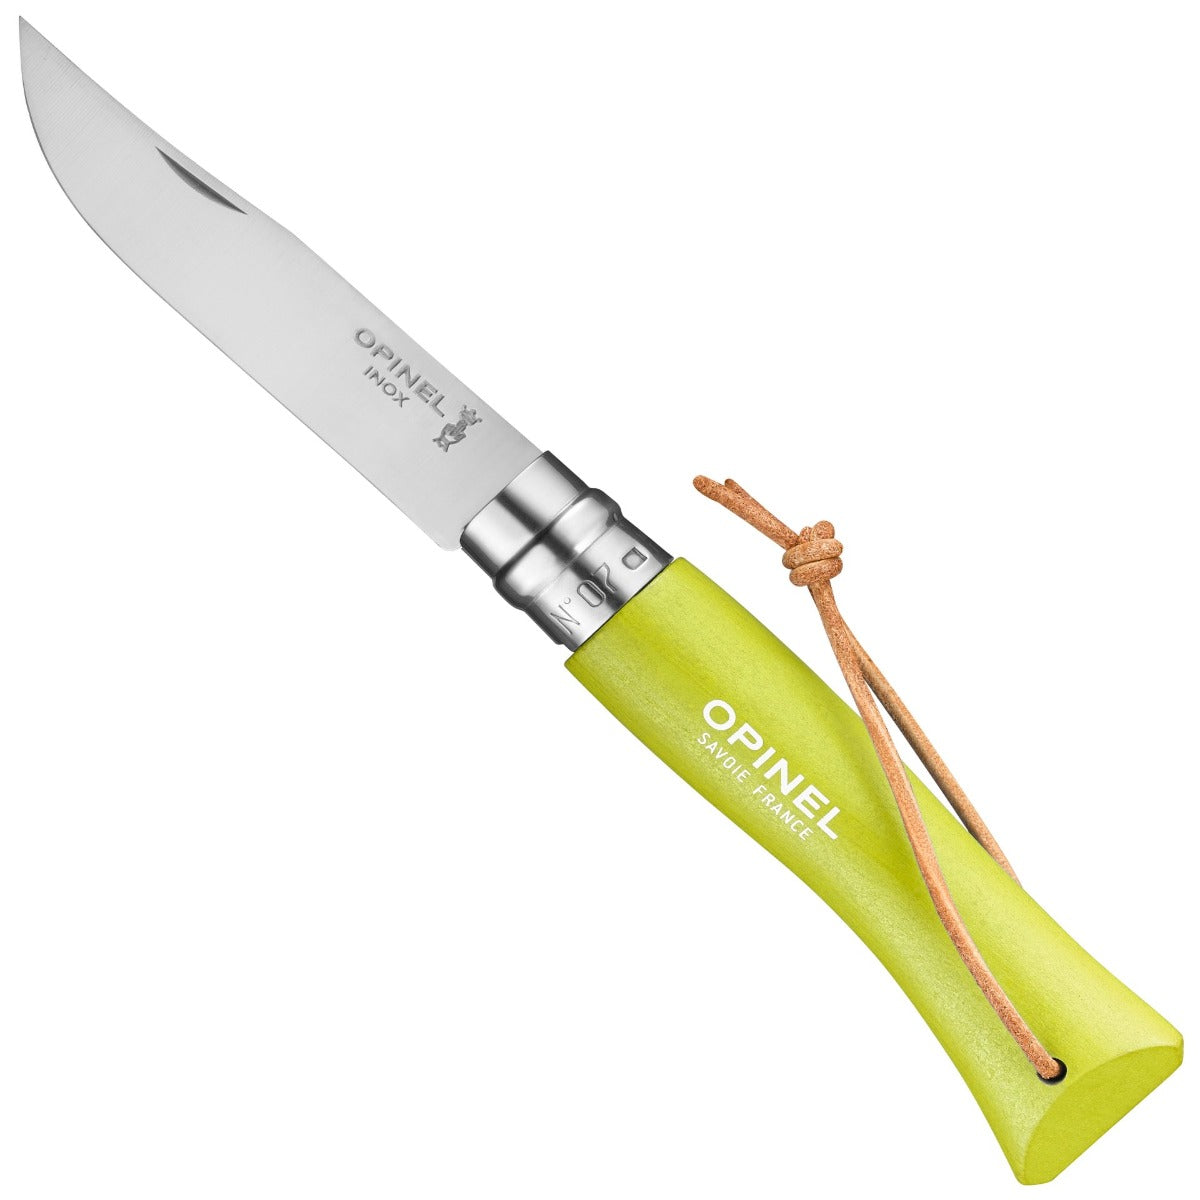 Opinel No.13 Stainless Steel Folding Knife